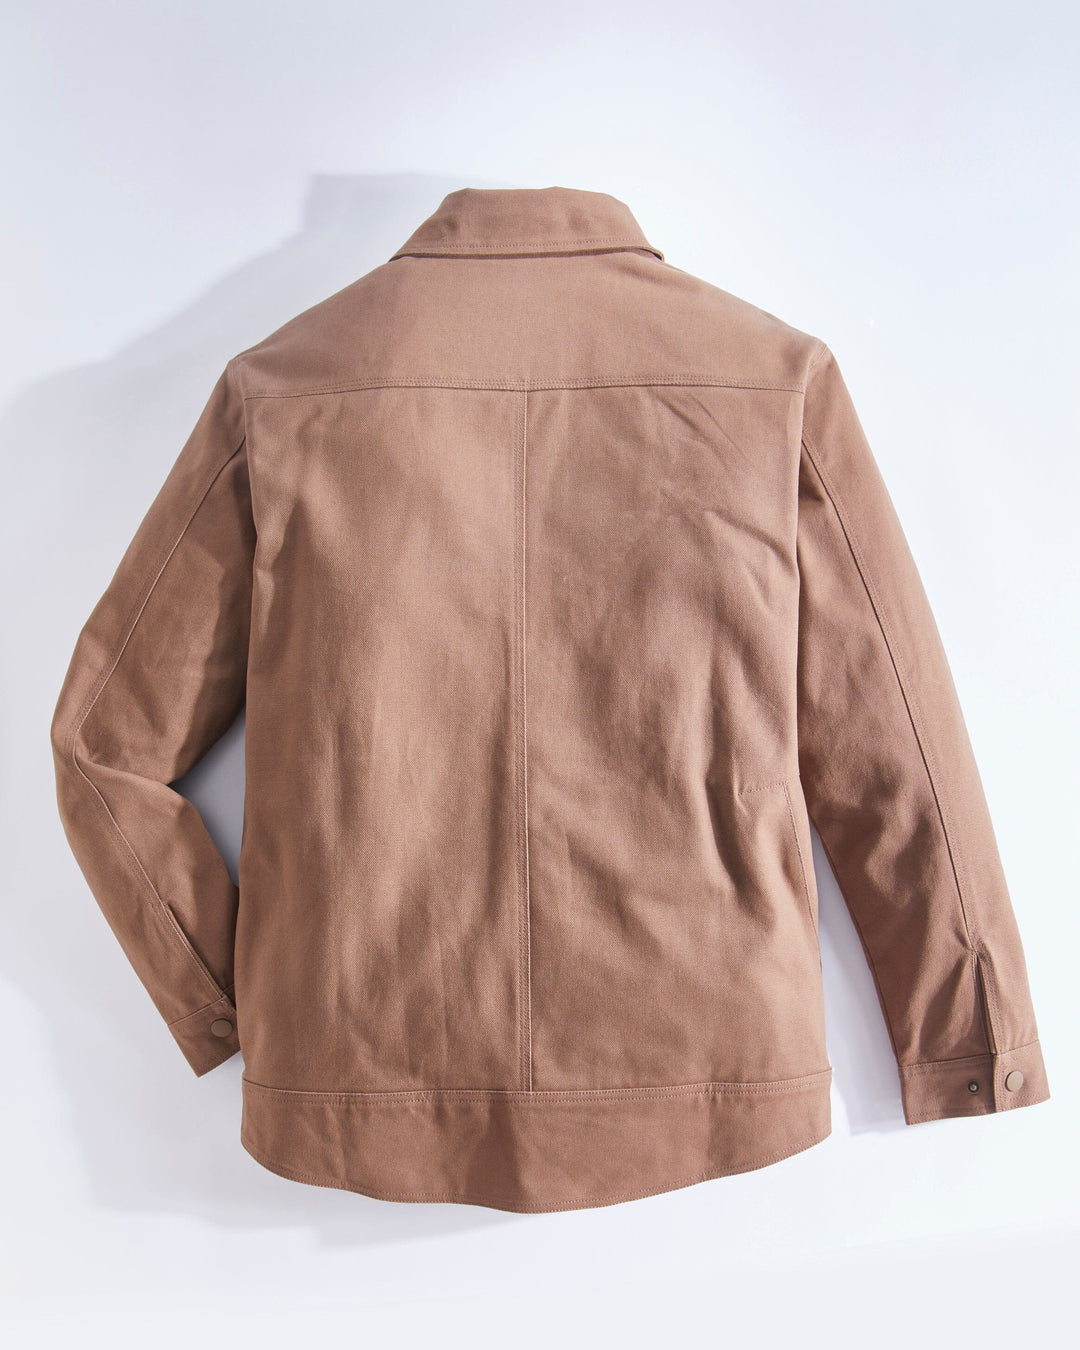 Concealed Carry Chisum Jacket – Dusty Cowboy